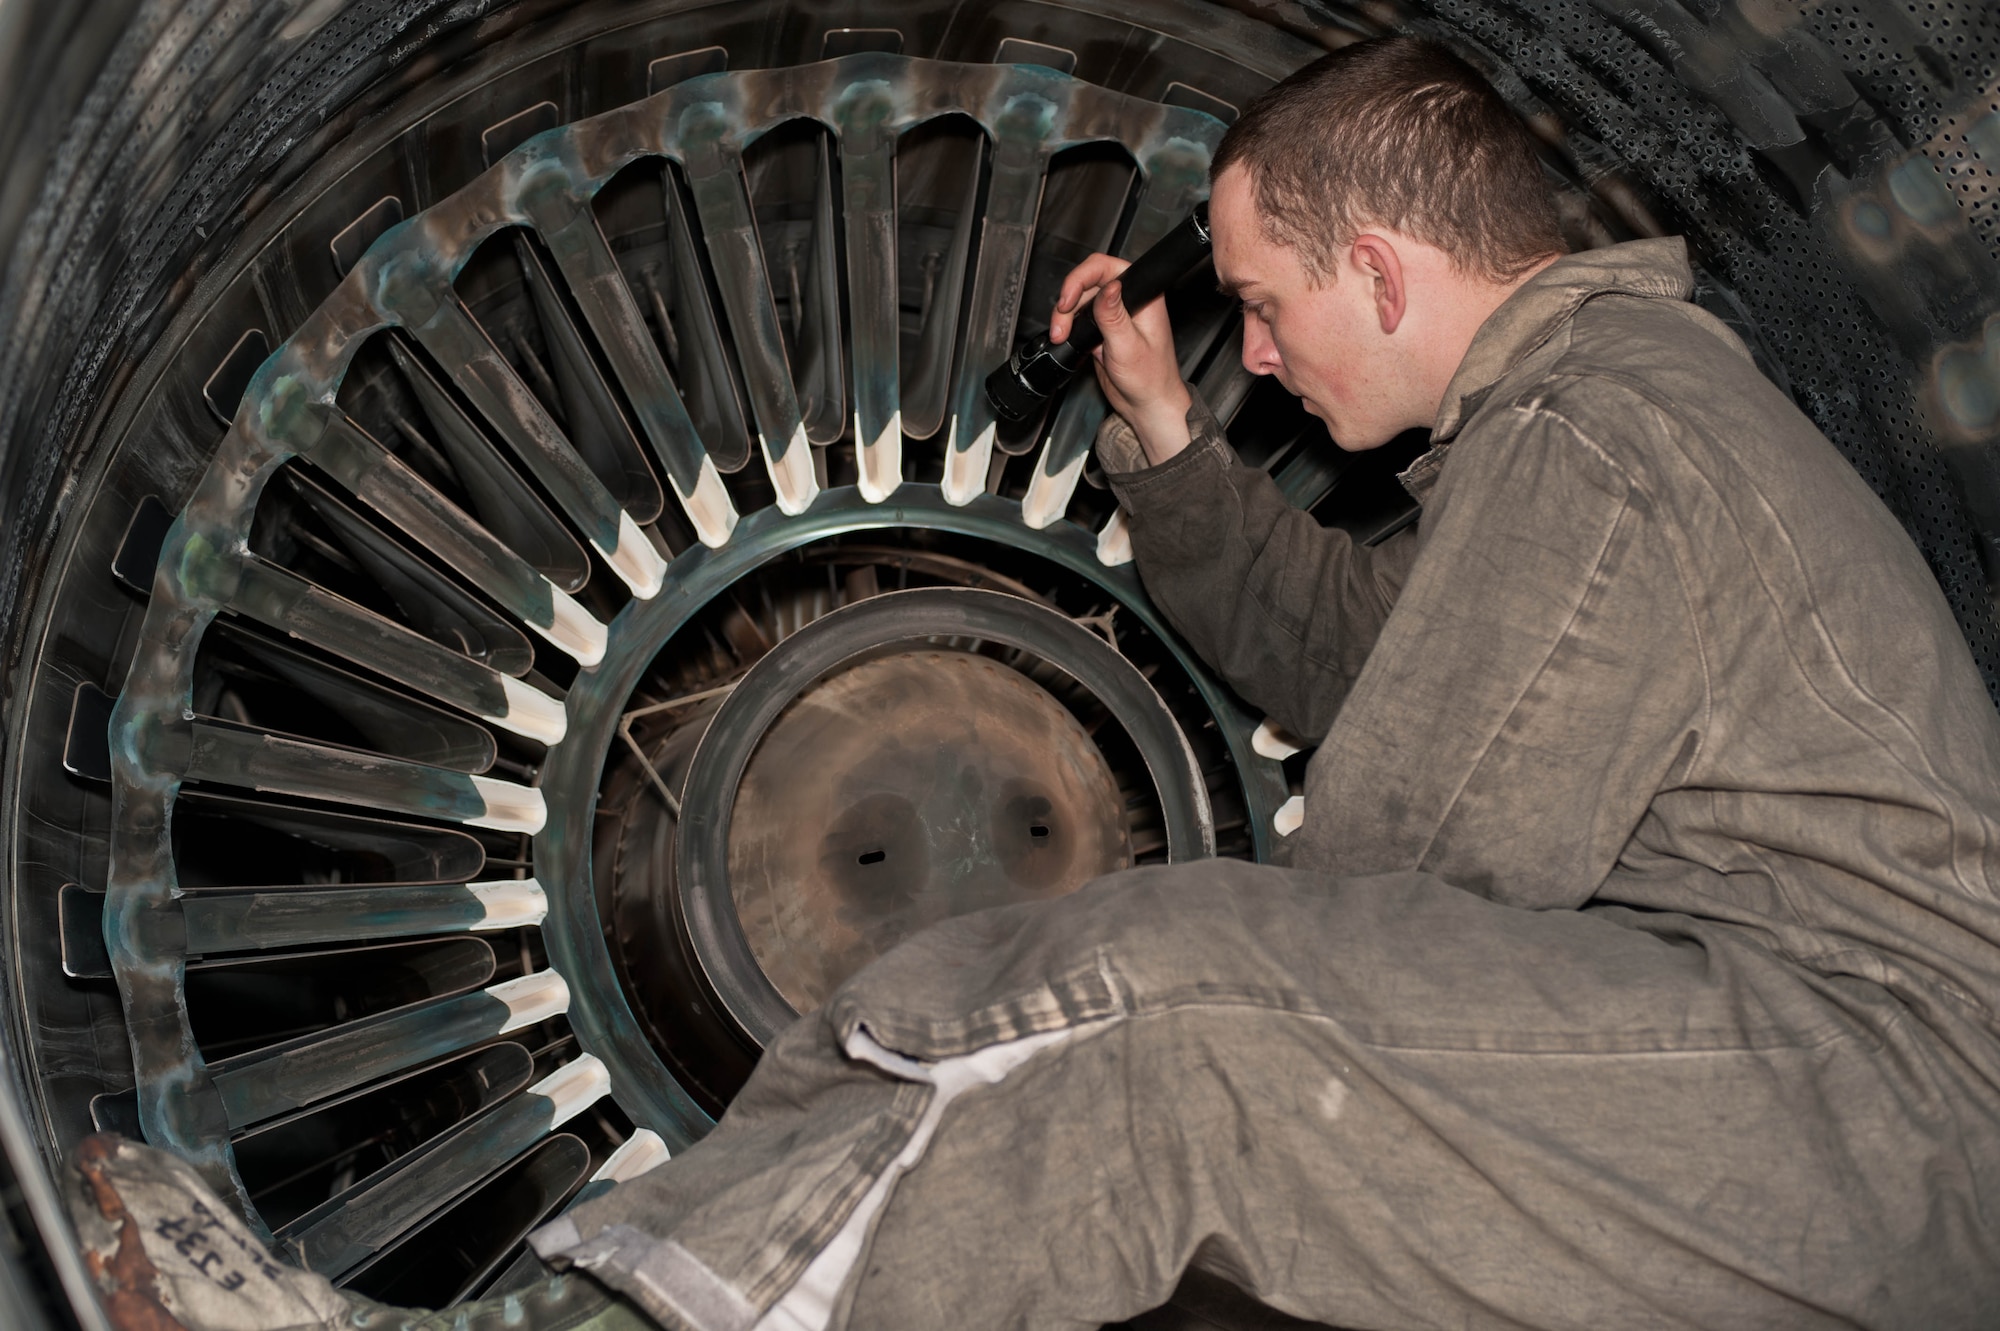 Senior Airman Terry Morris, 28th Aircraft Maintenance Squadron aerospace propulsion technician, examines the exhaust systems of a B-1 bomber for damage during an inspection at Ellsworth Air Force Base, S.D., March 28, 2013. Aerospace propulsion technicians are one of six specialties in the 28th Maintenance Group’s specialist section responsible to keep more than turbofan engines mission-ready. (U.S. Air Force photo by Airman 1st Class Zachary Hada/Released)